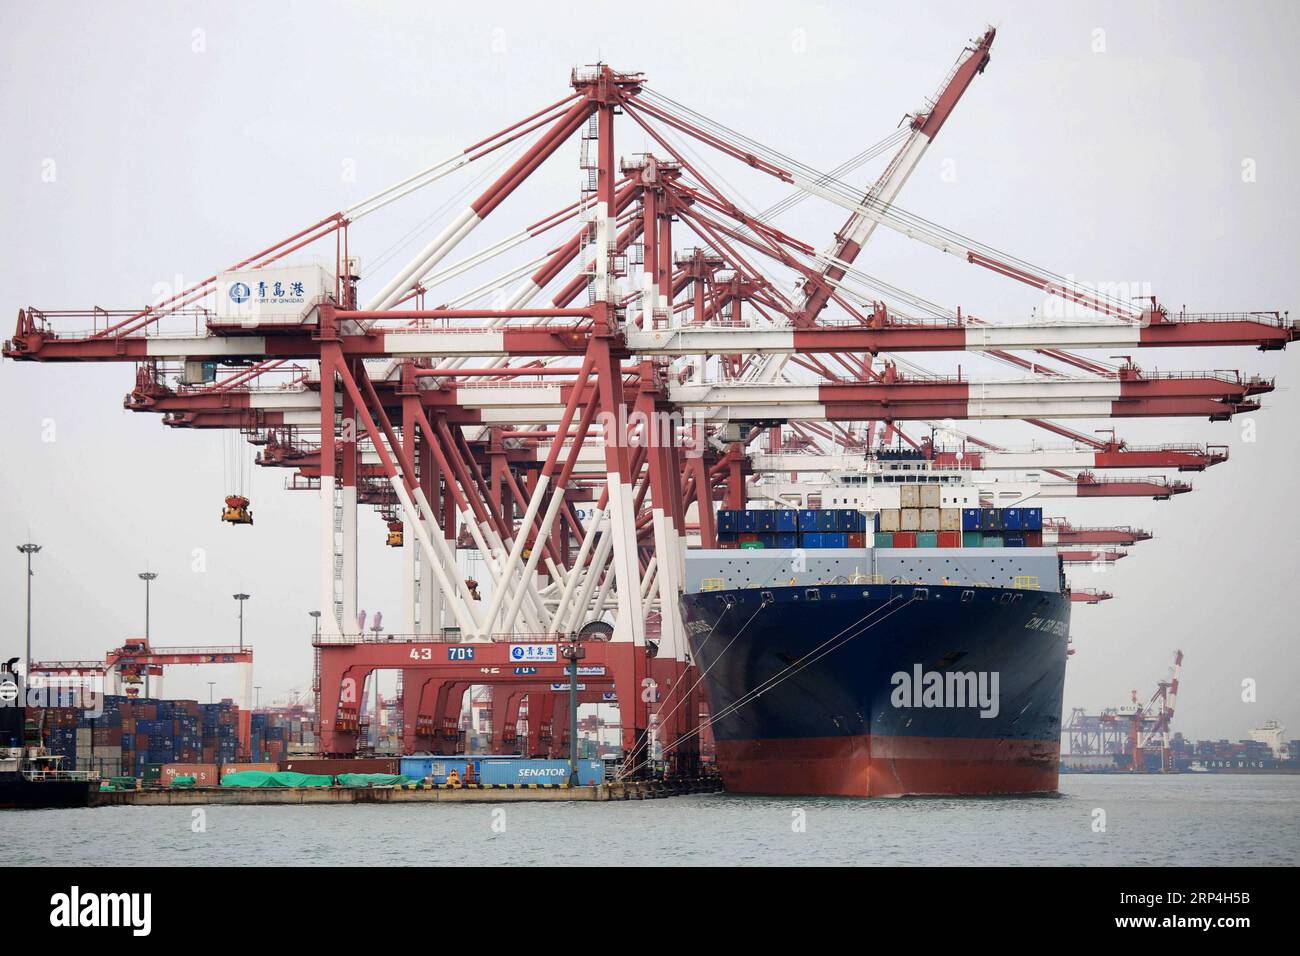 (181108) -- QINGDAO, Nov. 8, 2018 -- A cargo ship unloads containers at the container terminal of Port of Qingdao, east China s Shandong Province, on Nov. 8, 2018. For the first 10 months of 2018, China s foreign trade totaled 25.05 trillion yuan (3.614 trillion U.S. dollars), up 11.3 percent year on year, with export up 7.9 percent, hitting 13.35 trillion yuan (1.926 trillion dollars), and import up 15.5 percent, hitting 11.7 trillion yuan (1.69 trillion dollars) year on year respectively. ) (sxk) CHINA-TRADE-GROWTH (CN) YuxFangping PUBLICATIONxNOTxINxCHN Stock Photo